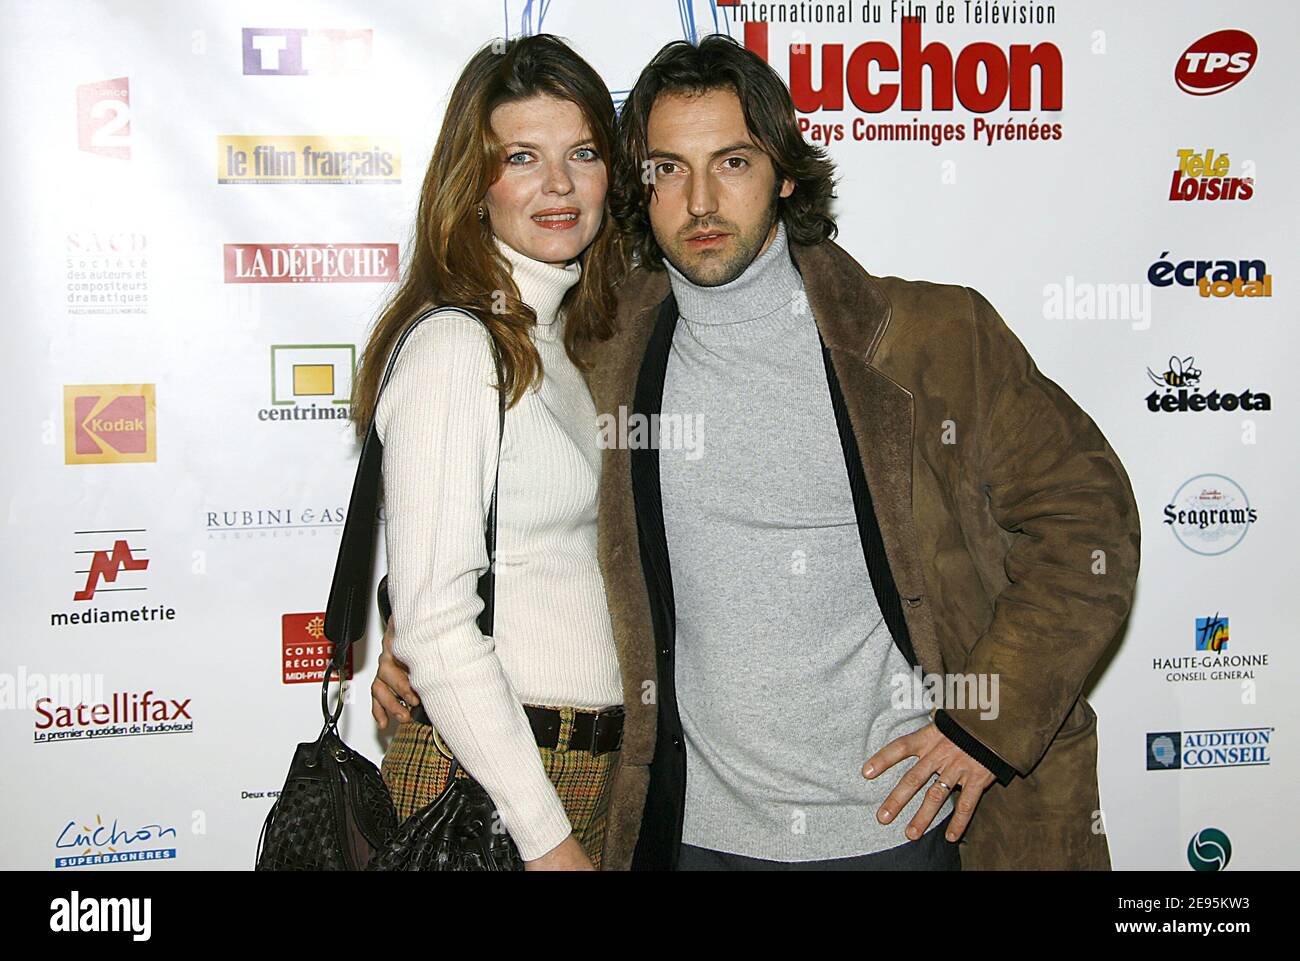 Frederic Diefenthal and wife Gwendoline pose during the 8th Luchon International Television Film Festival in the French Pyrenees on February 4, 2006. Photo by Patrick Bernard/ABACAPRESS.COM. Stock Photo